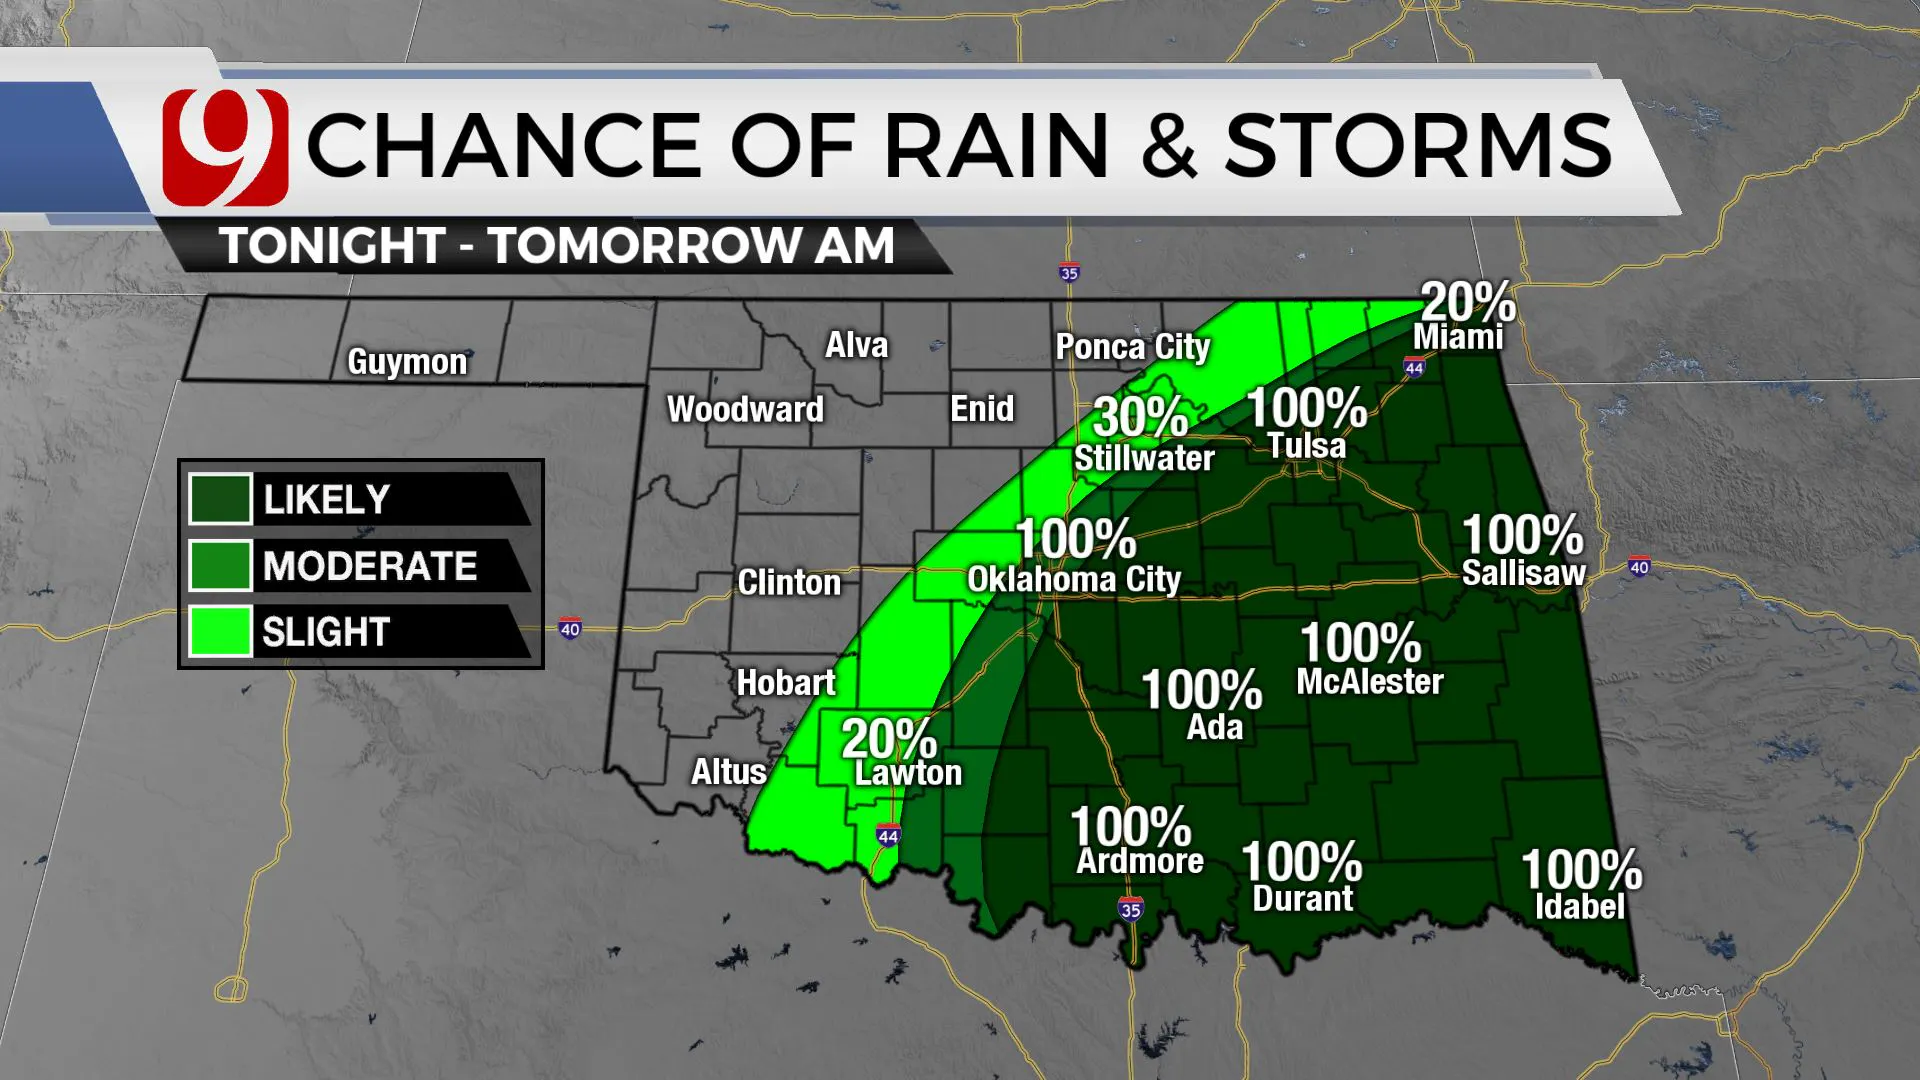 Chances of rain and storms tonight through Saturday morning.